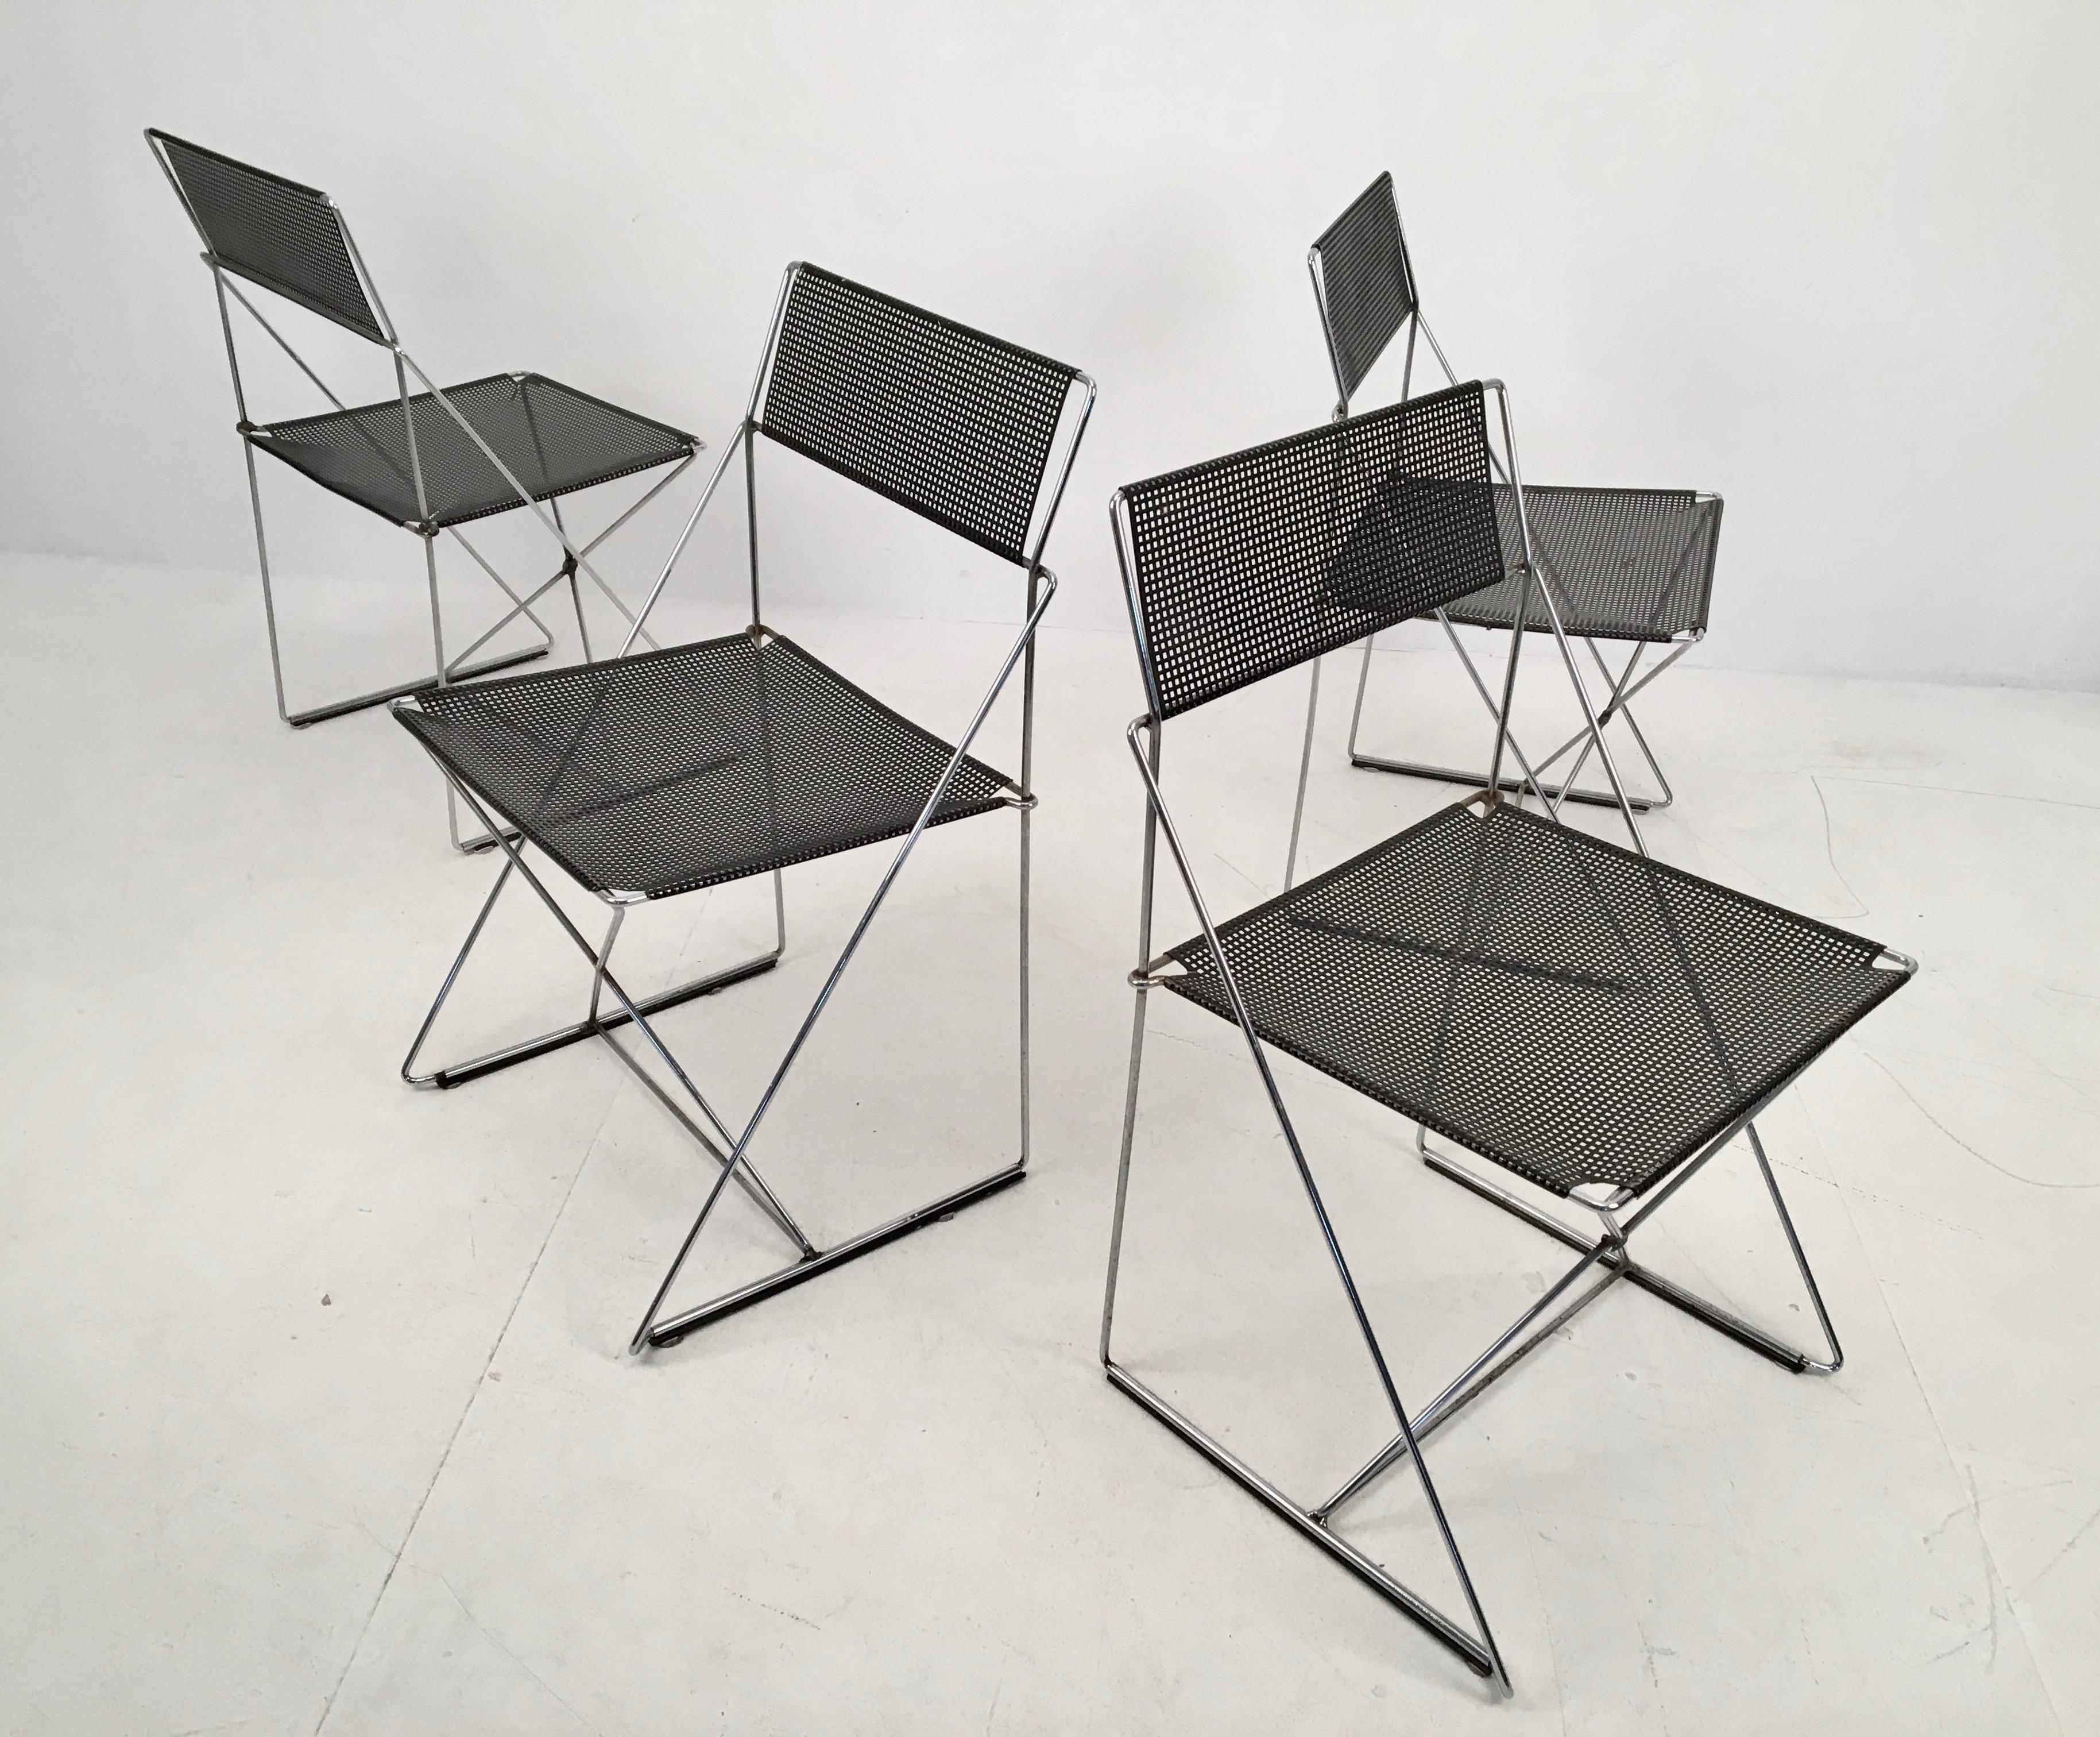 4 Black Stacking X-Line Chairs by N. J. Haugesen for Hybodan, Denmark circa 1970 In Fair Condition For Sale In London, GB